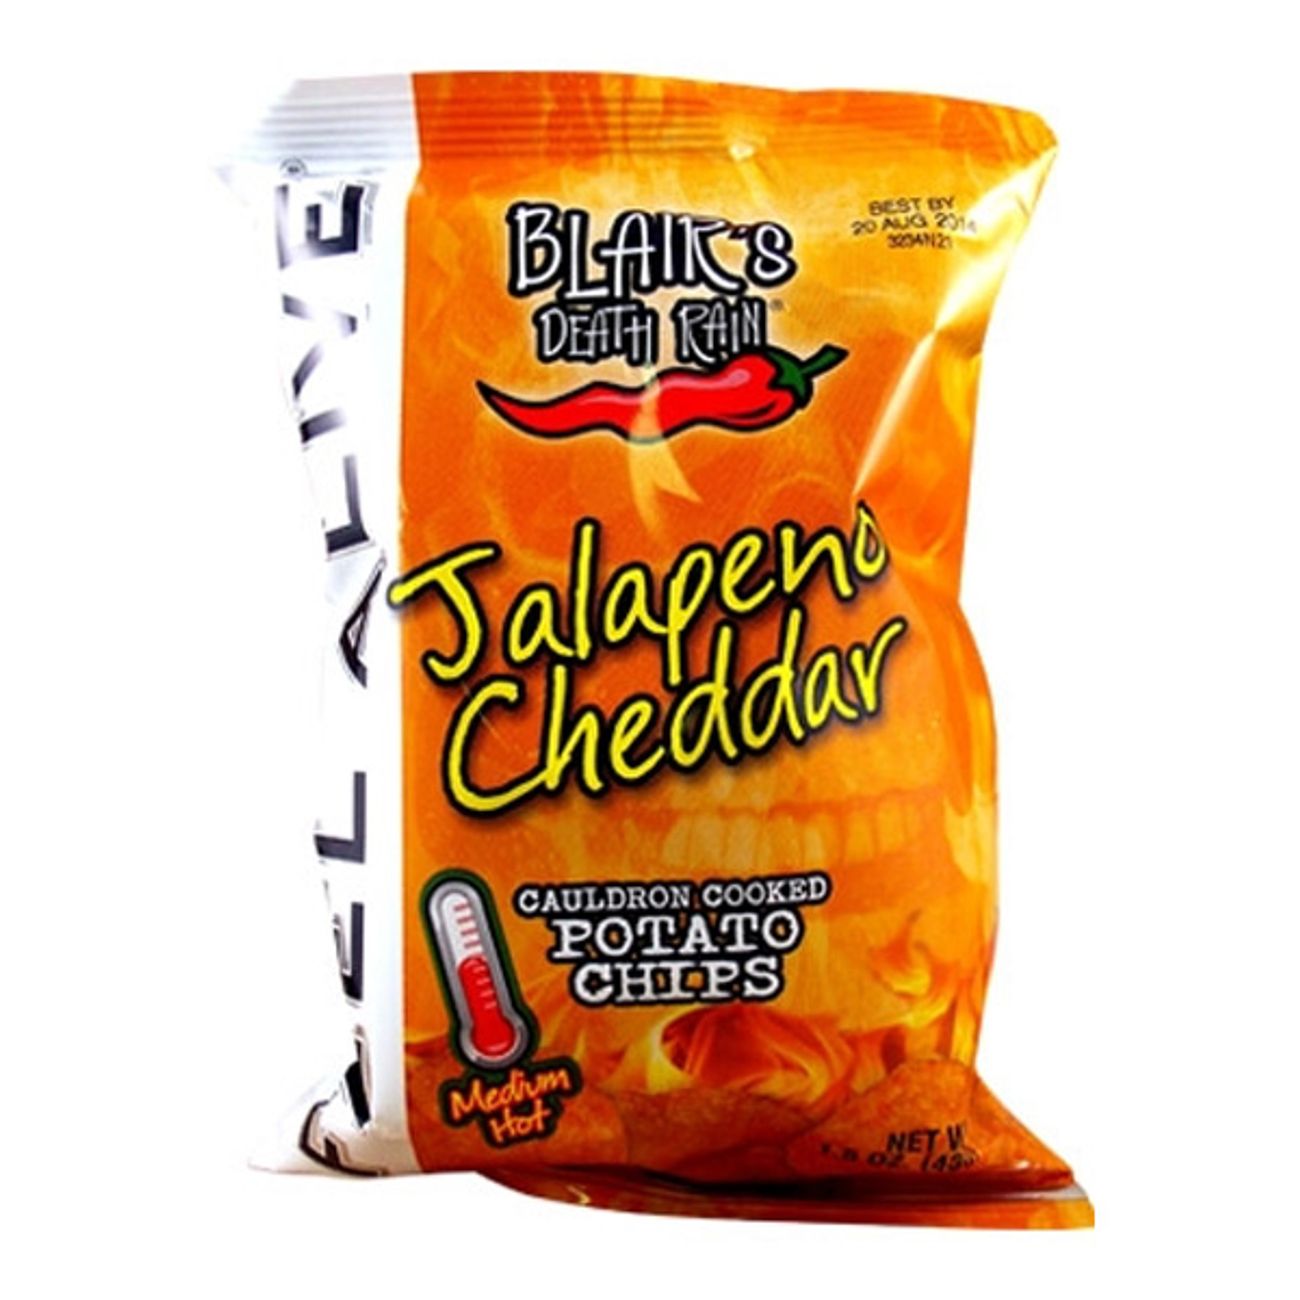 blairs-kettle-chips-cheddar-jalapeno-1